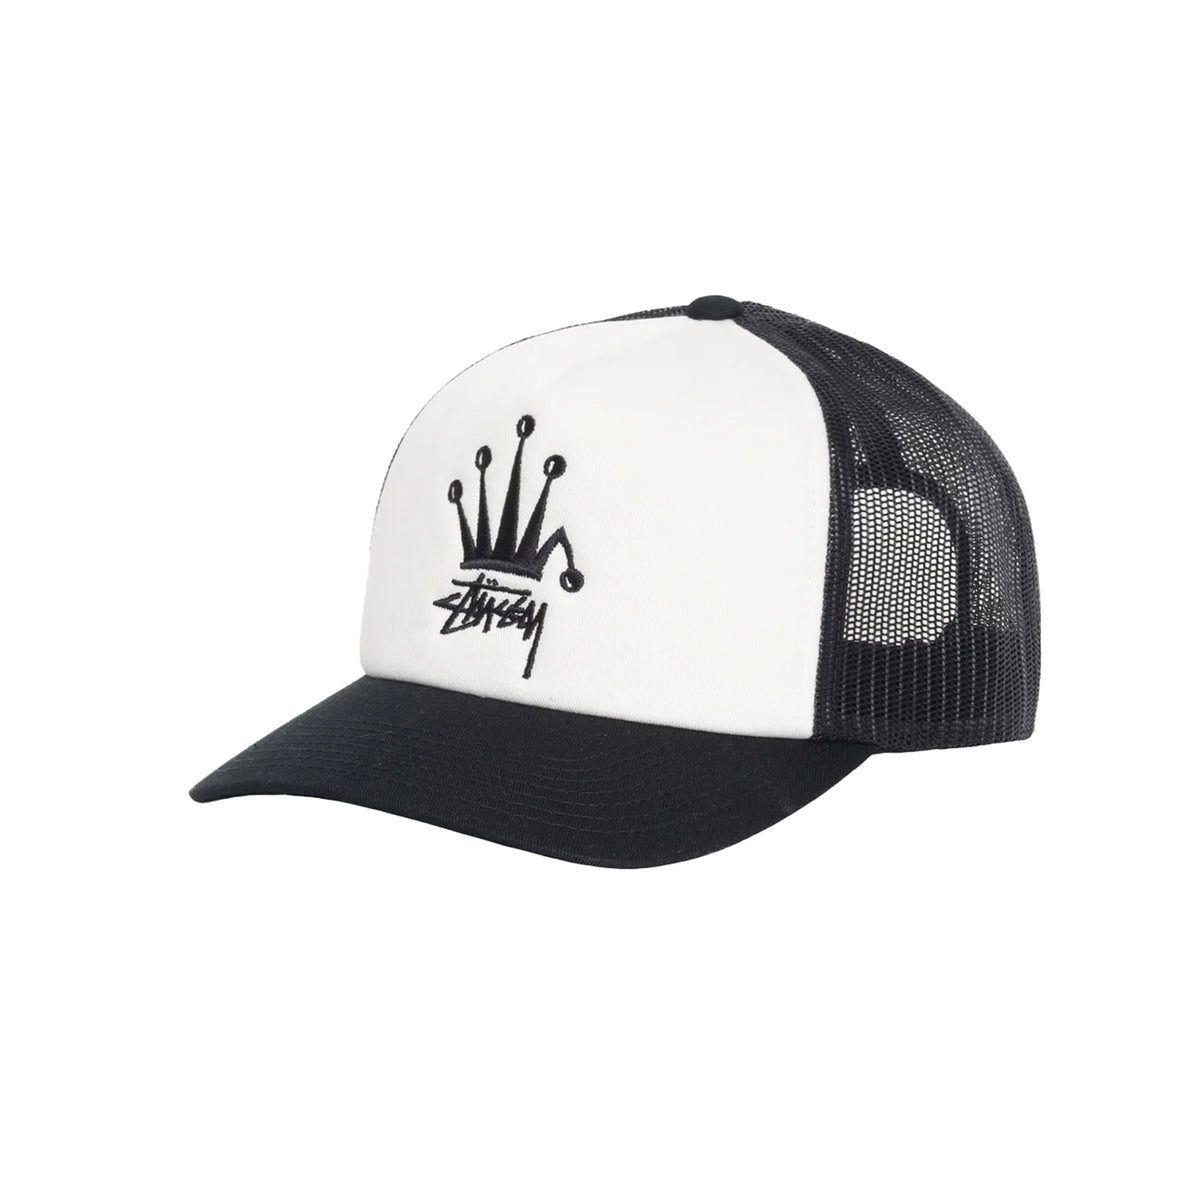 Shop for Affordable Stussy Crown Stock Trucker Cap - Black Stussy